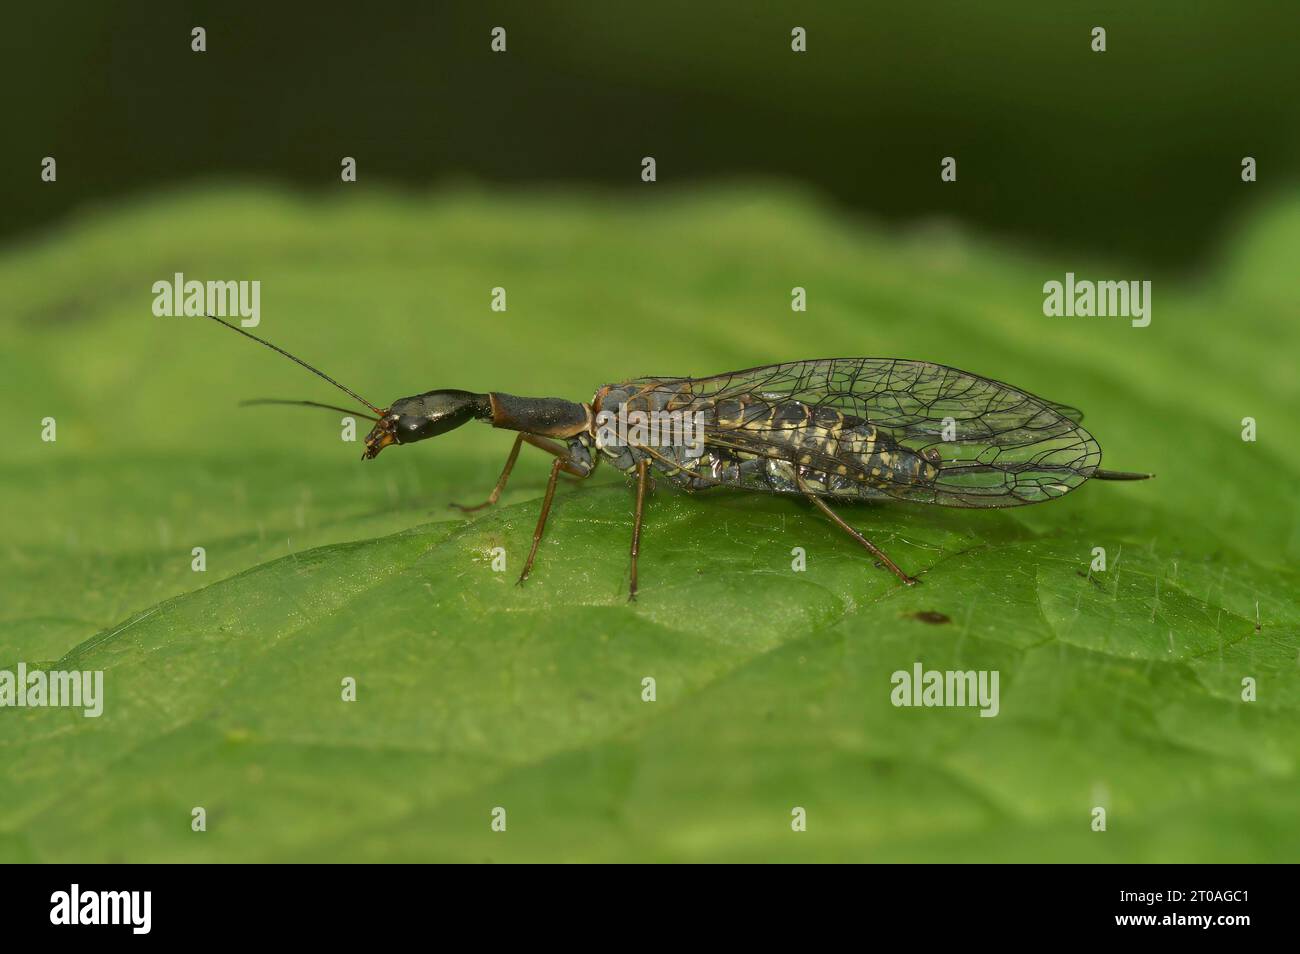 Natural closeup on a bizarre looking snake fly, Subilla confinis, sitting on a green leaf Stock Photo